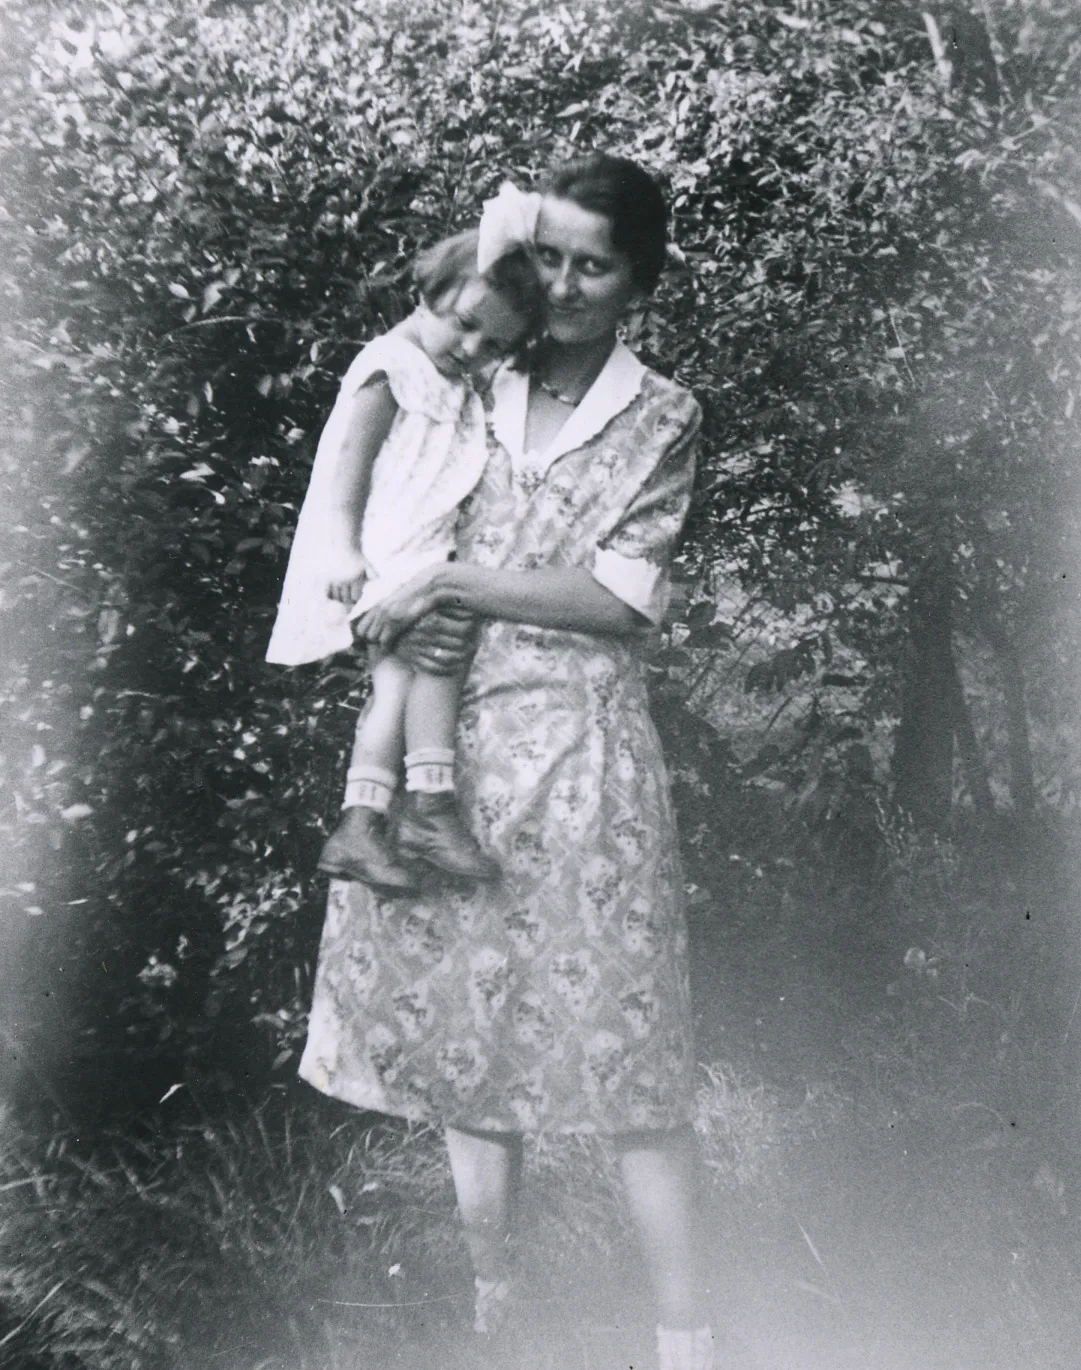 A woman wearing a dress holds a small girl.